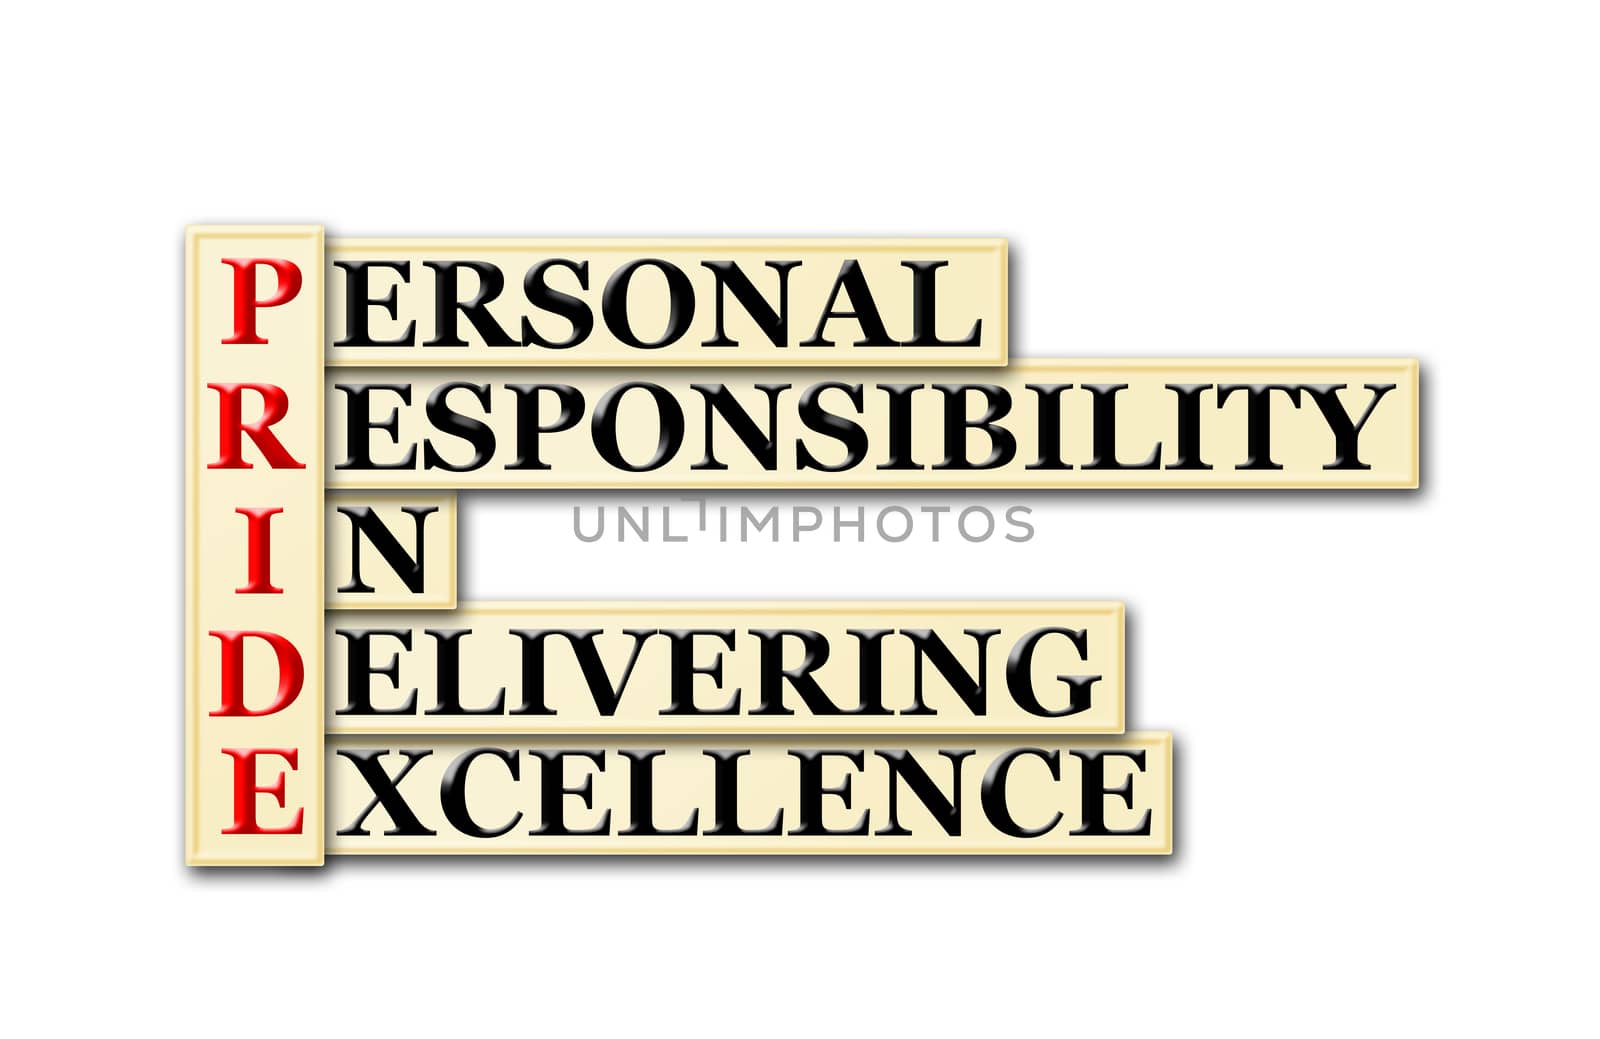 Conceptual PRIDE acronym - personal responsibility in delivering excellence. 